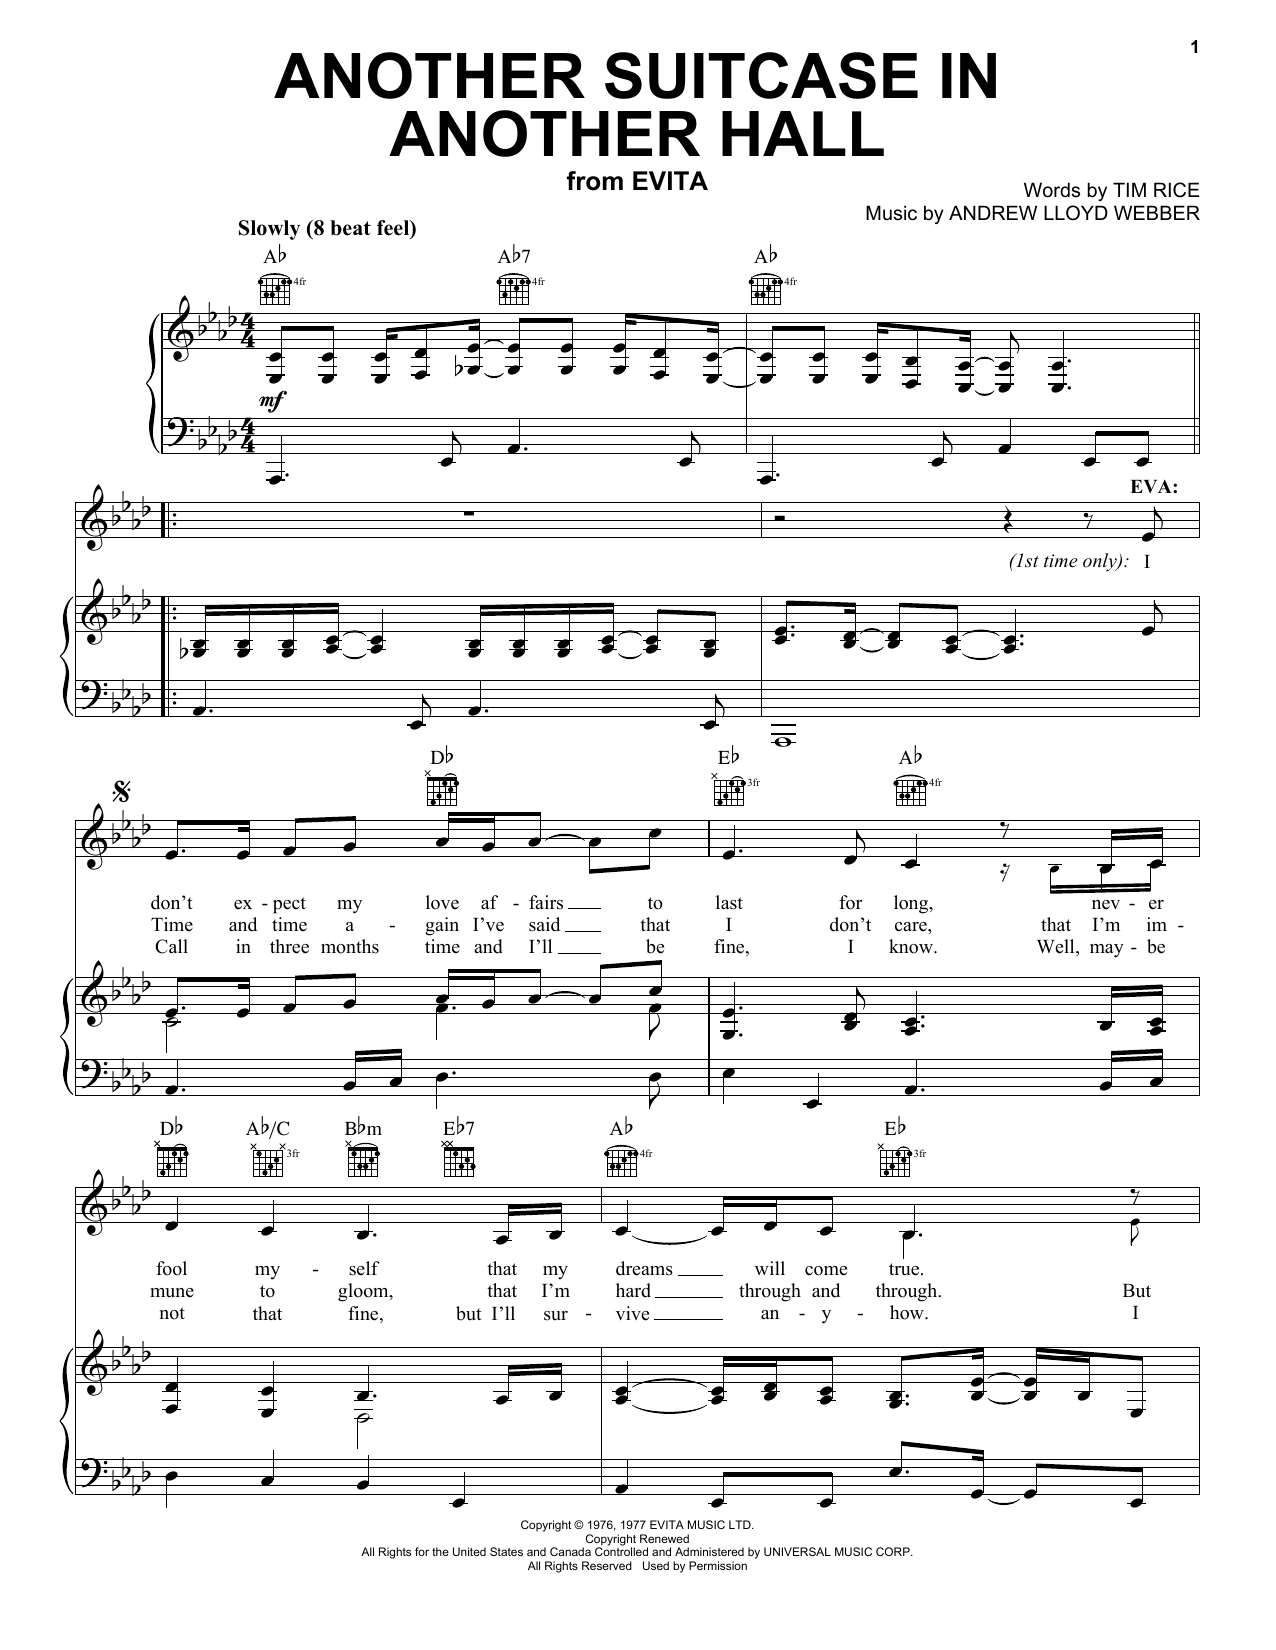 Andrew Lloyd Webber Another Suitcase In Another Hall (from Evita) sheet music notes and chords. Download Printable PDF.